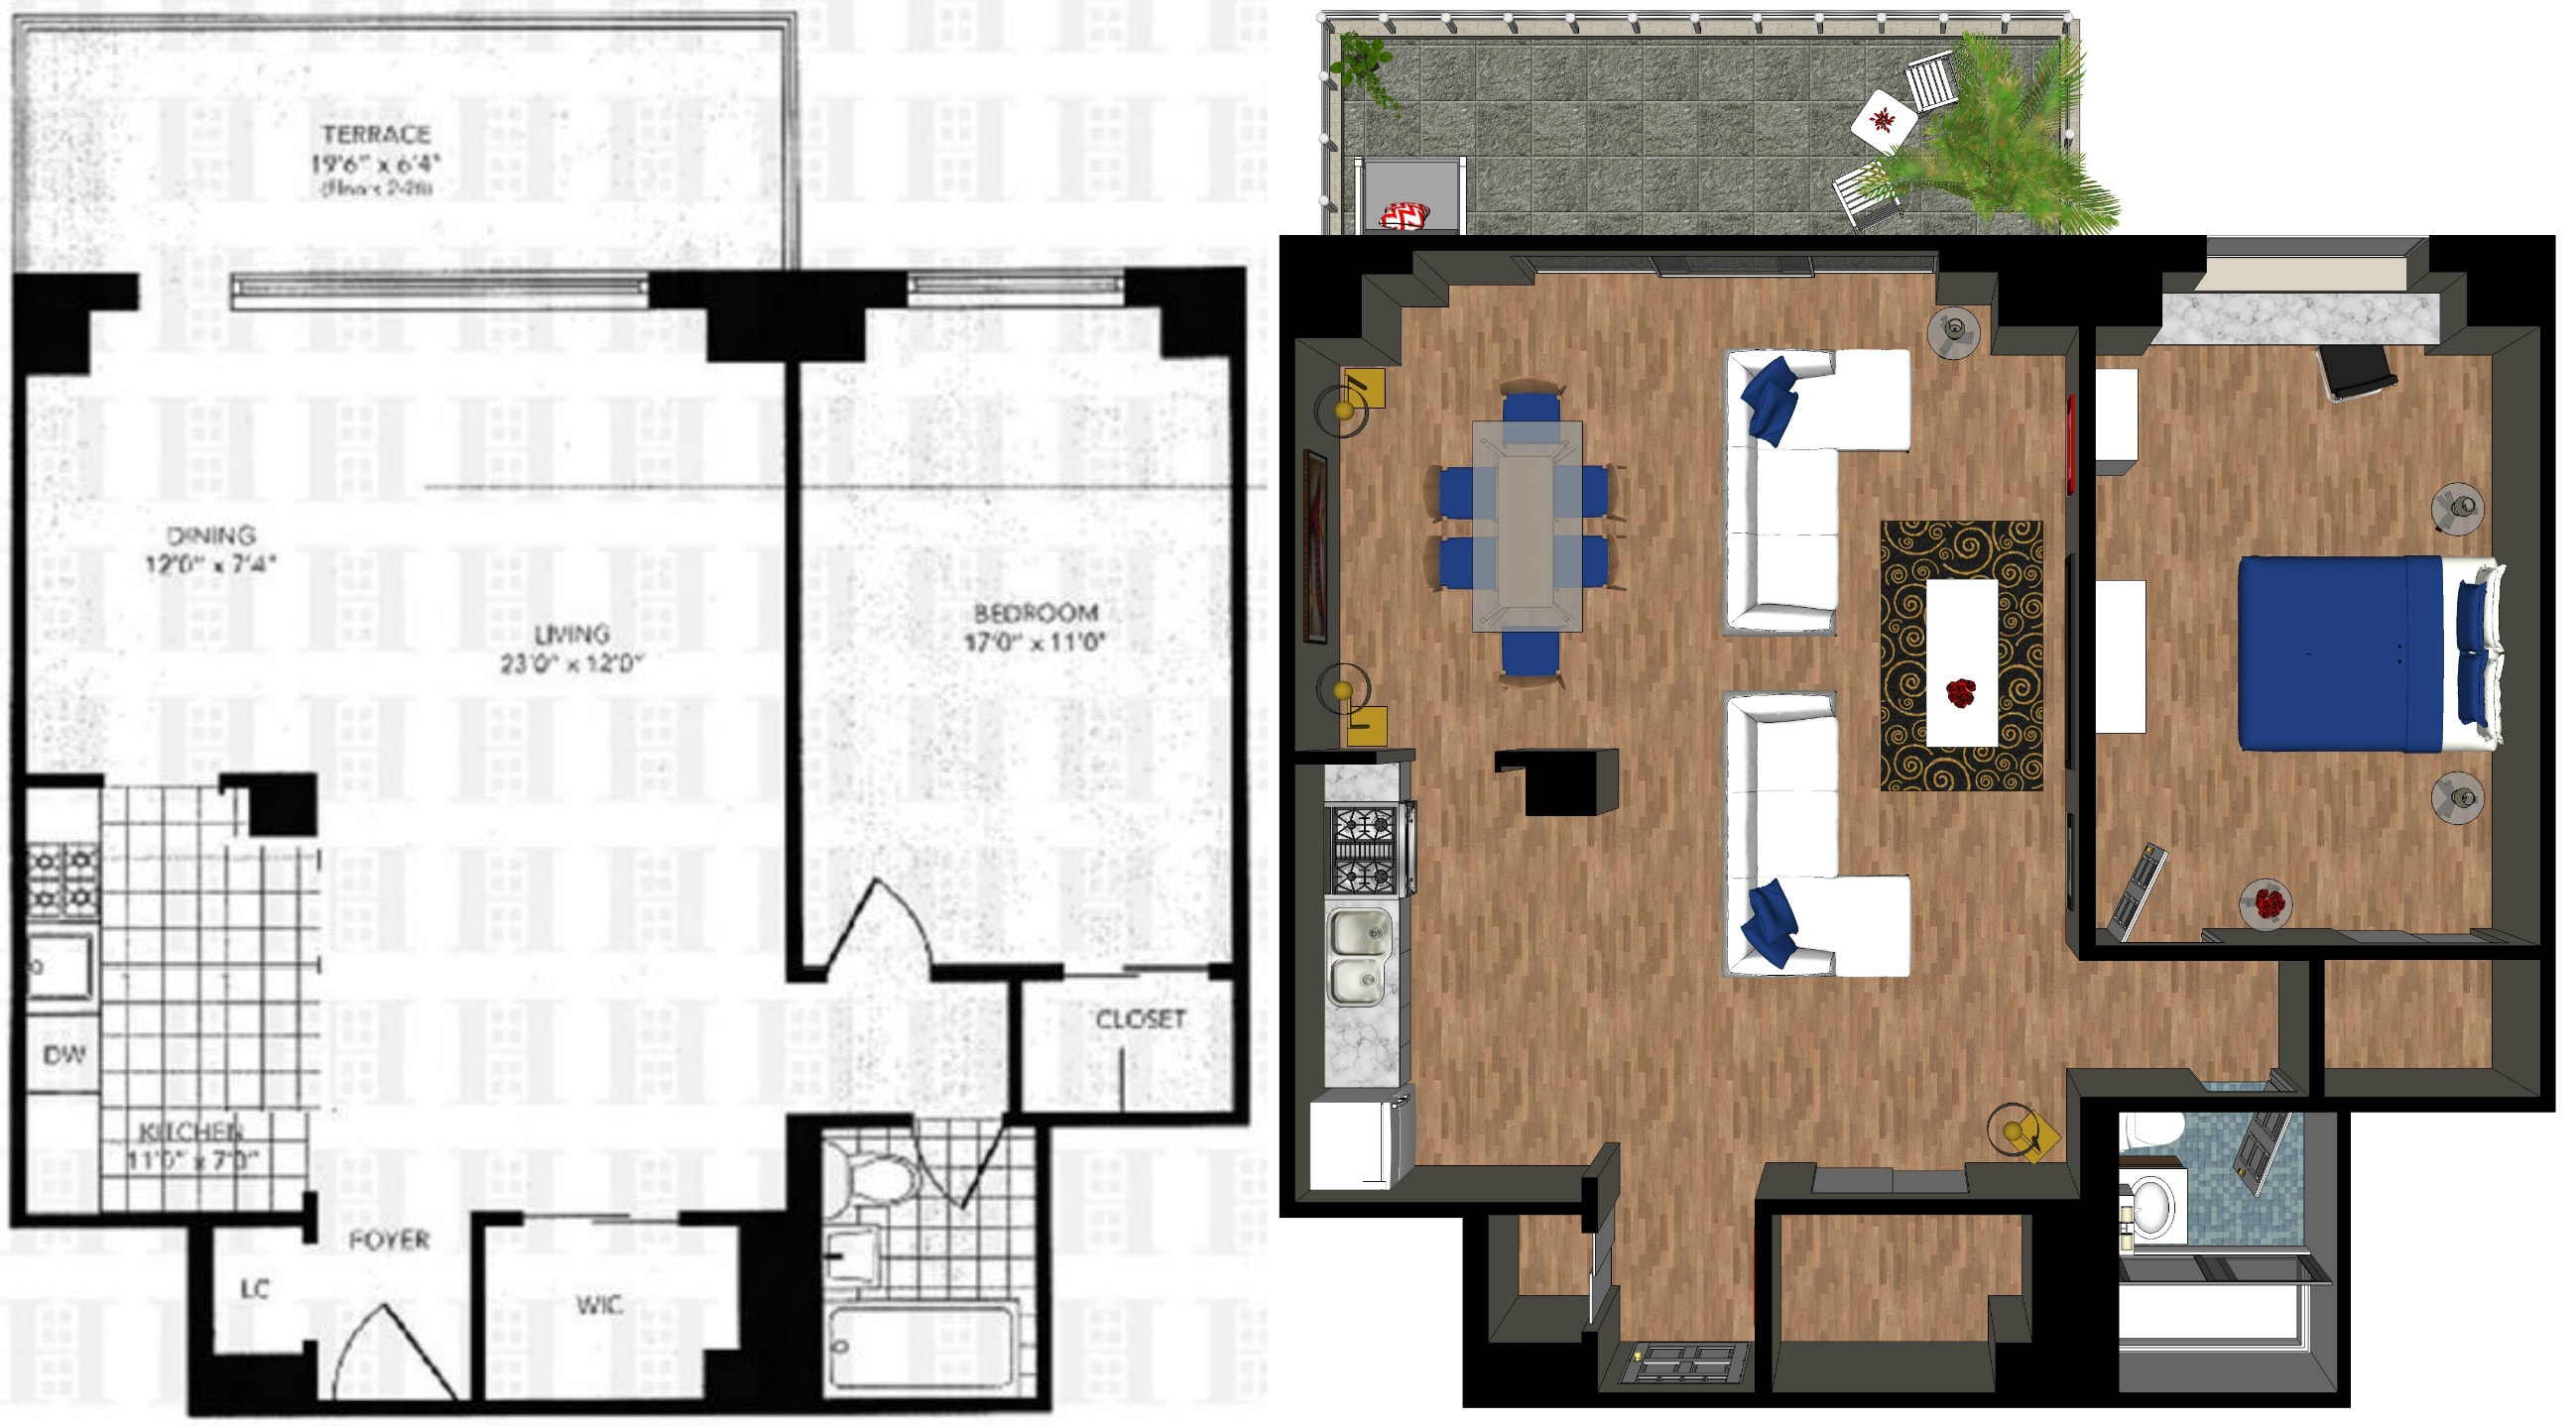 Quickly Draw 3d Model And Render A Floorplan Using Sketchup By